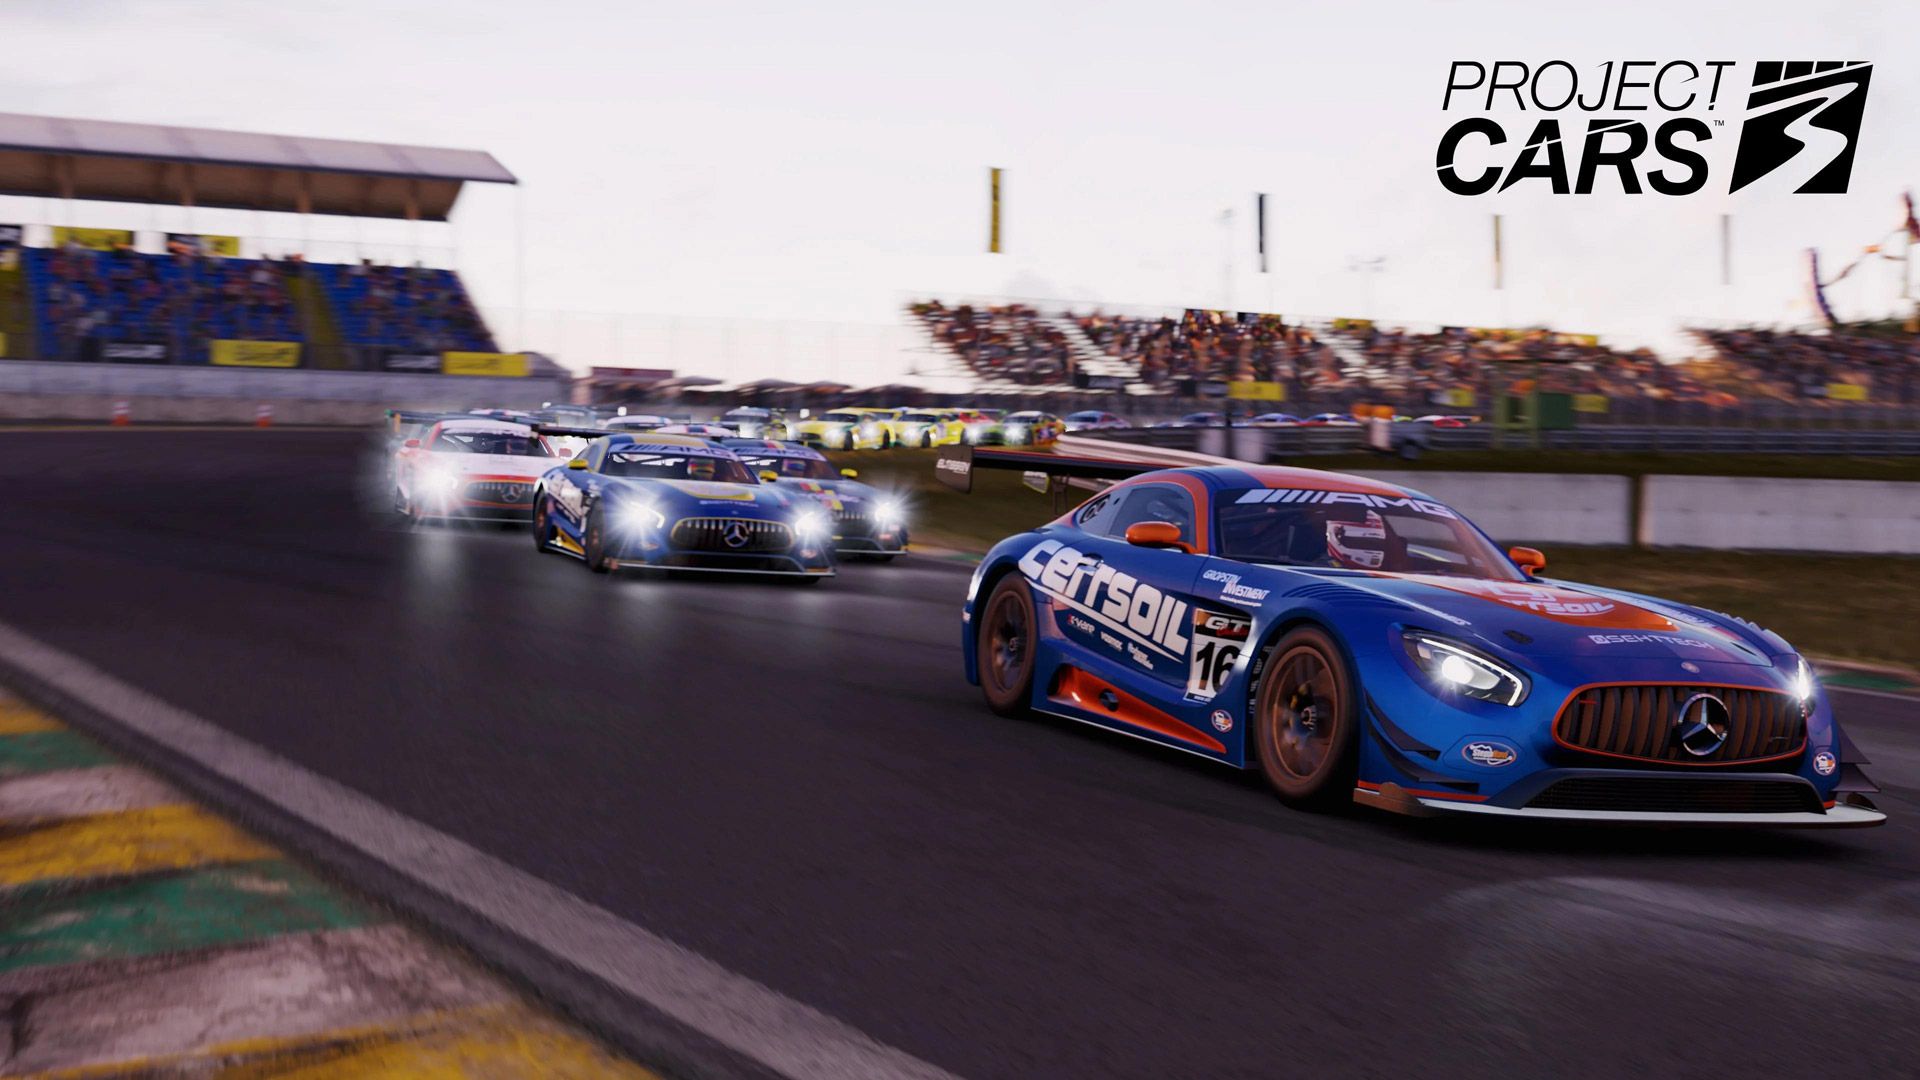 Free Project Cars 3 Wallpaper in 1920x1080